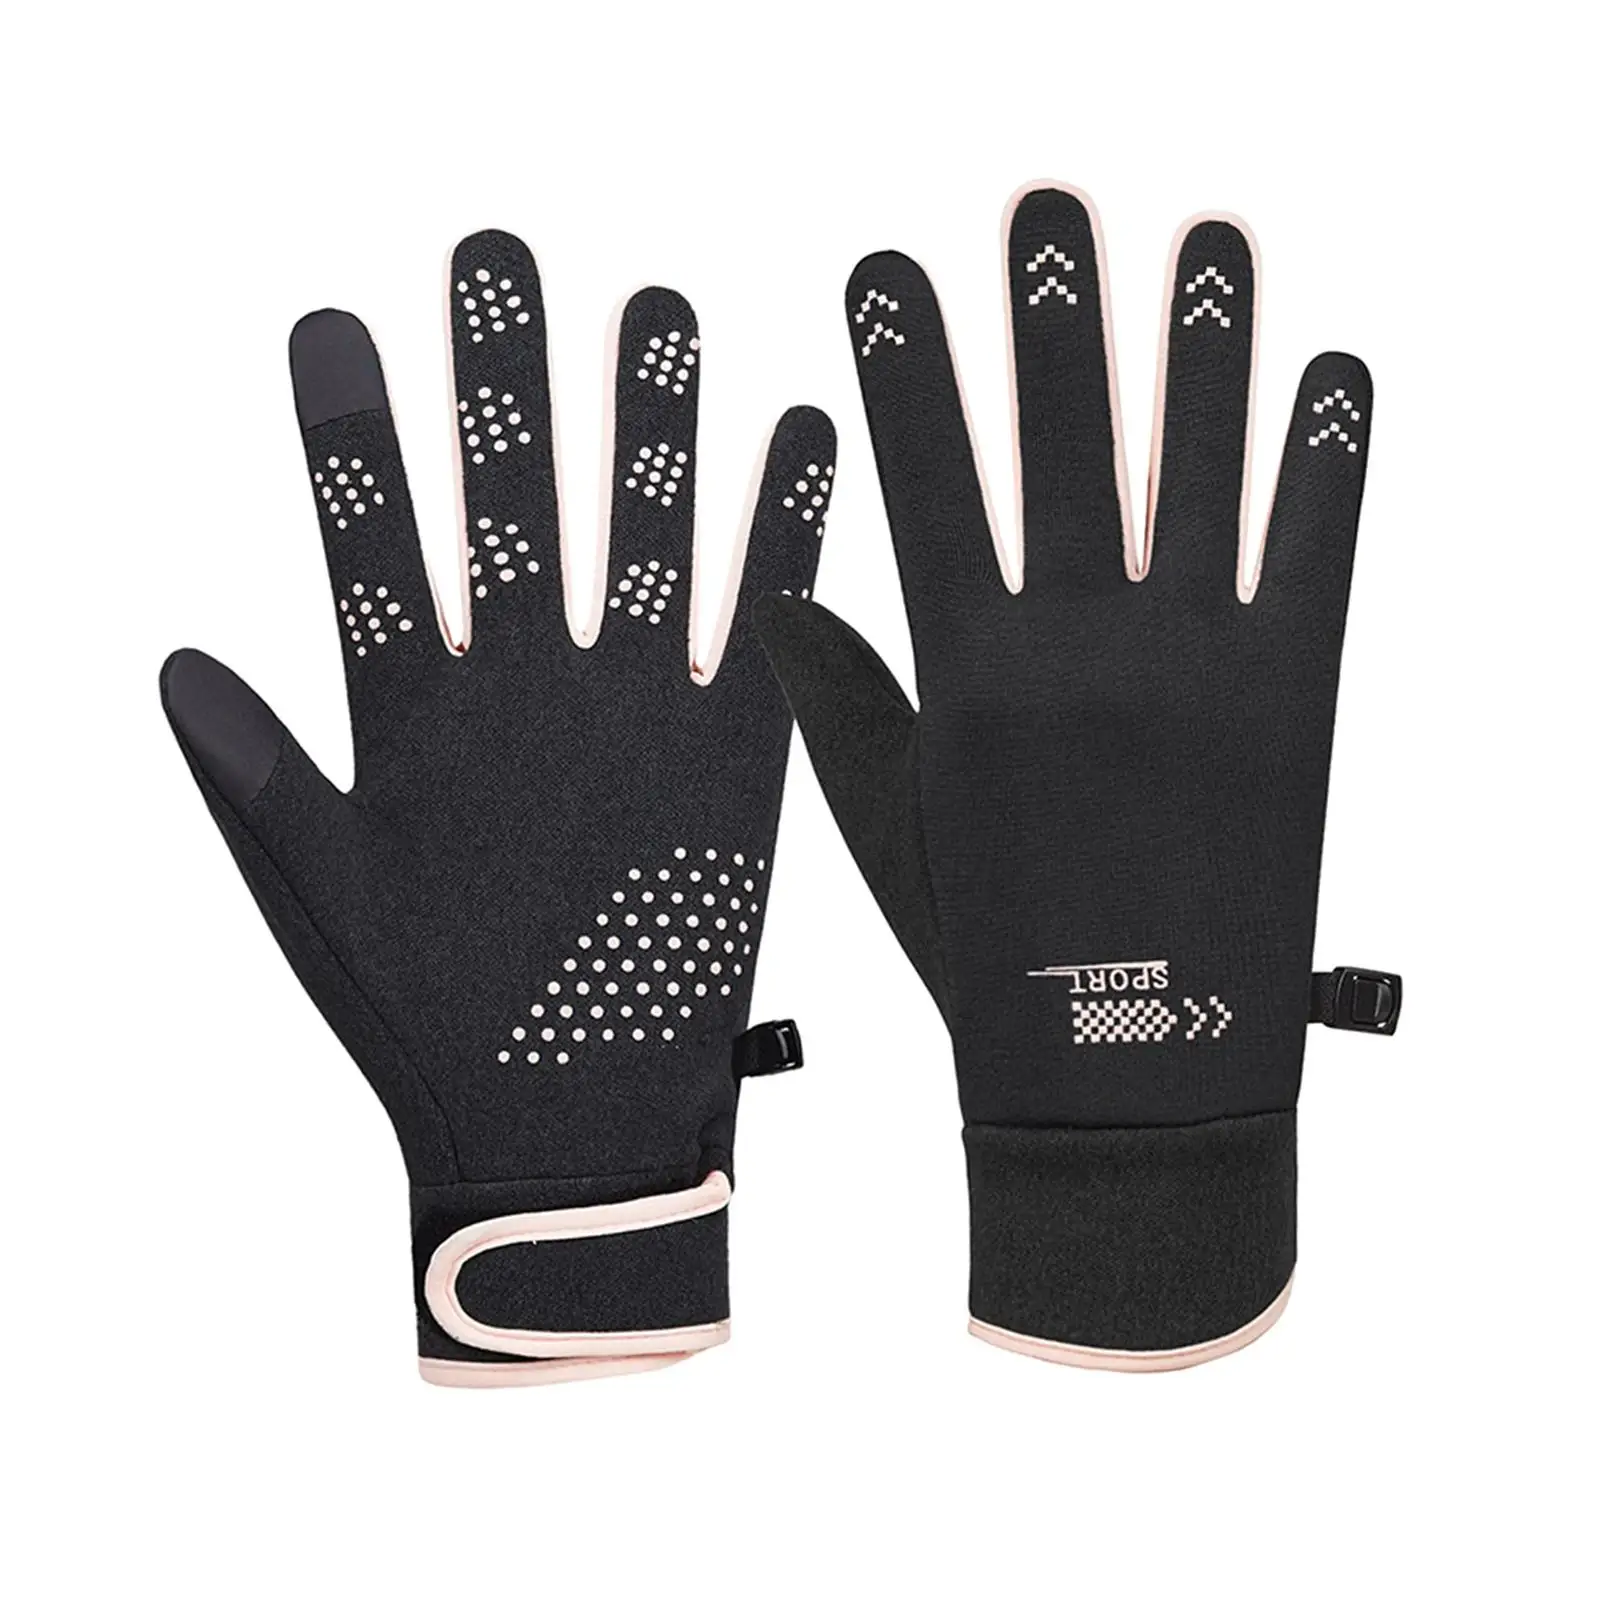 Winter Ski Gloves Touch Screen Gift Touchscreen Cold Weather Snow Gloves Cycling Gloves for Riding Outdoor Skiing Skating Snow